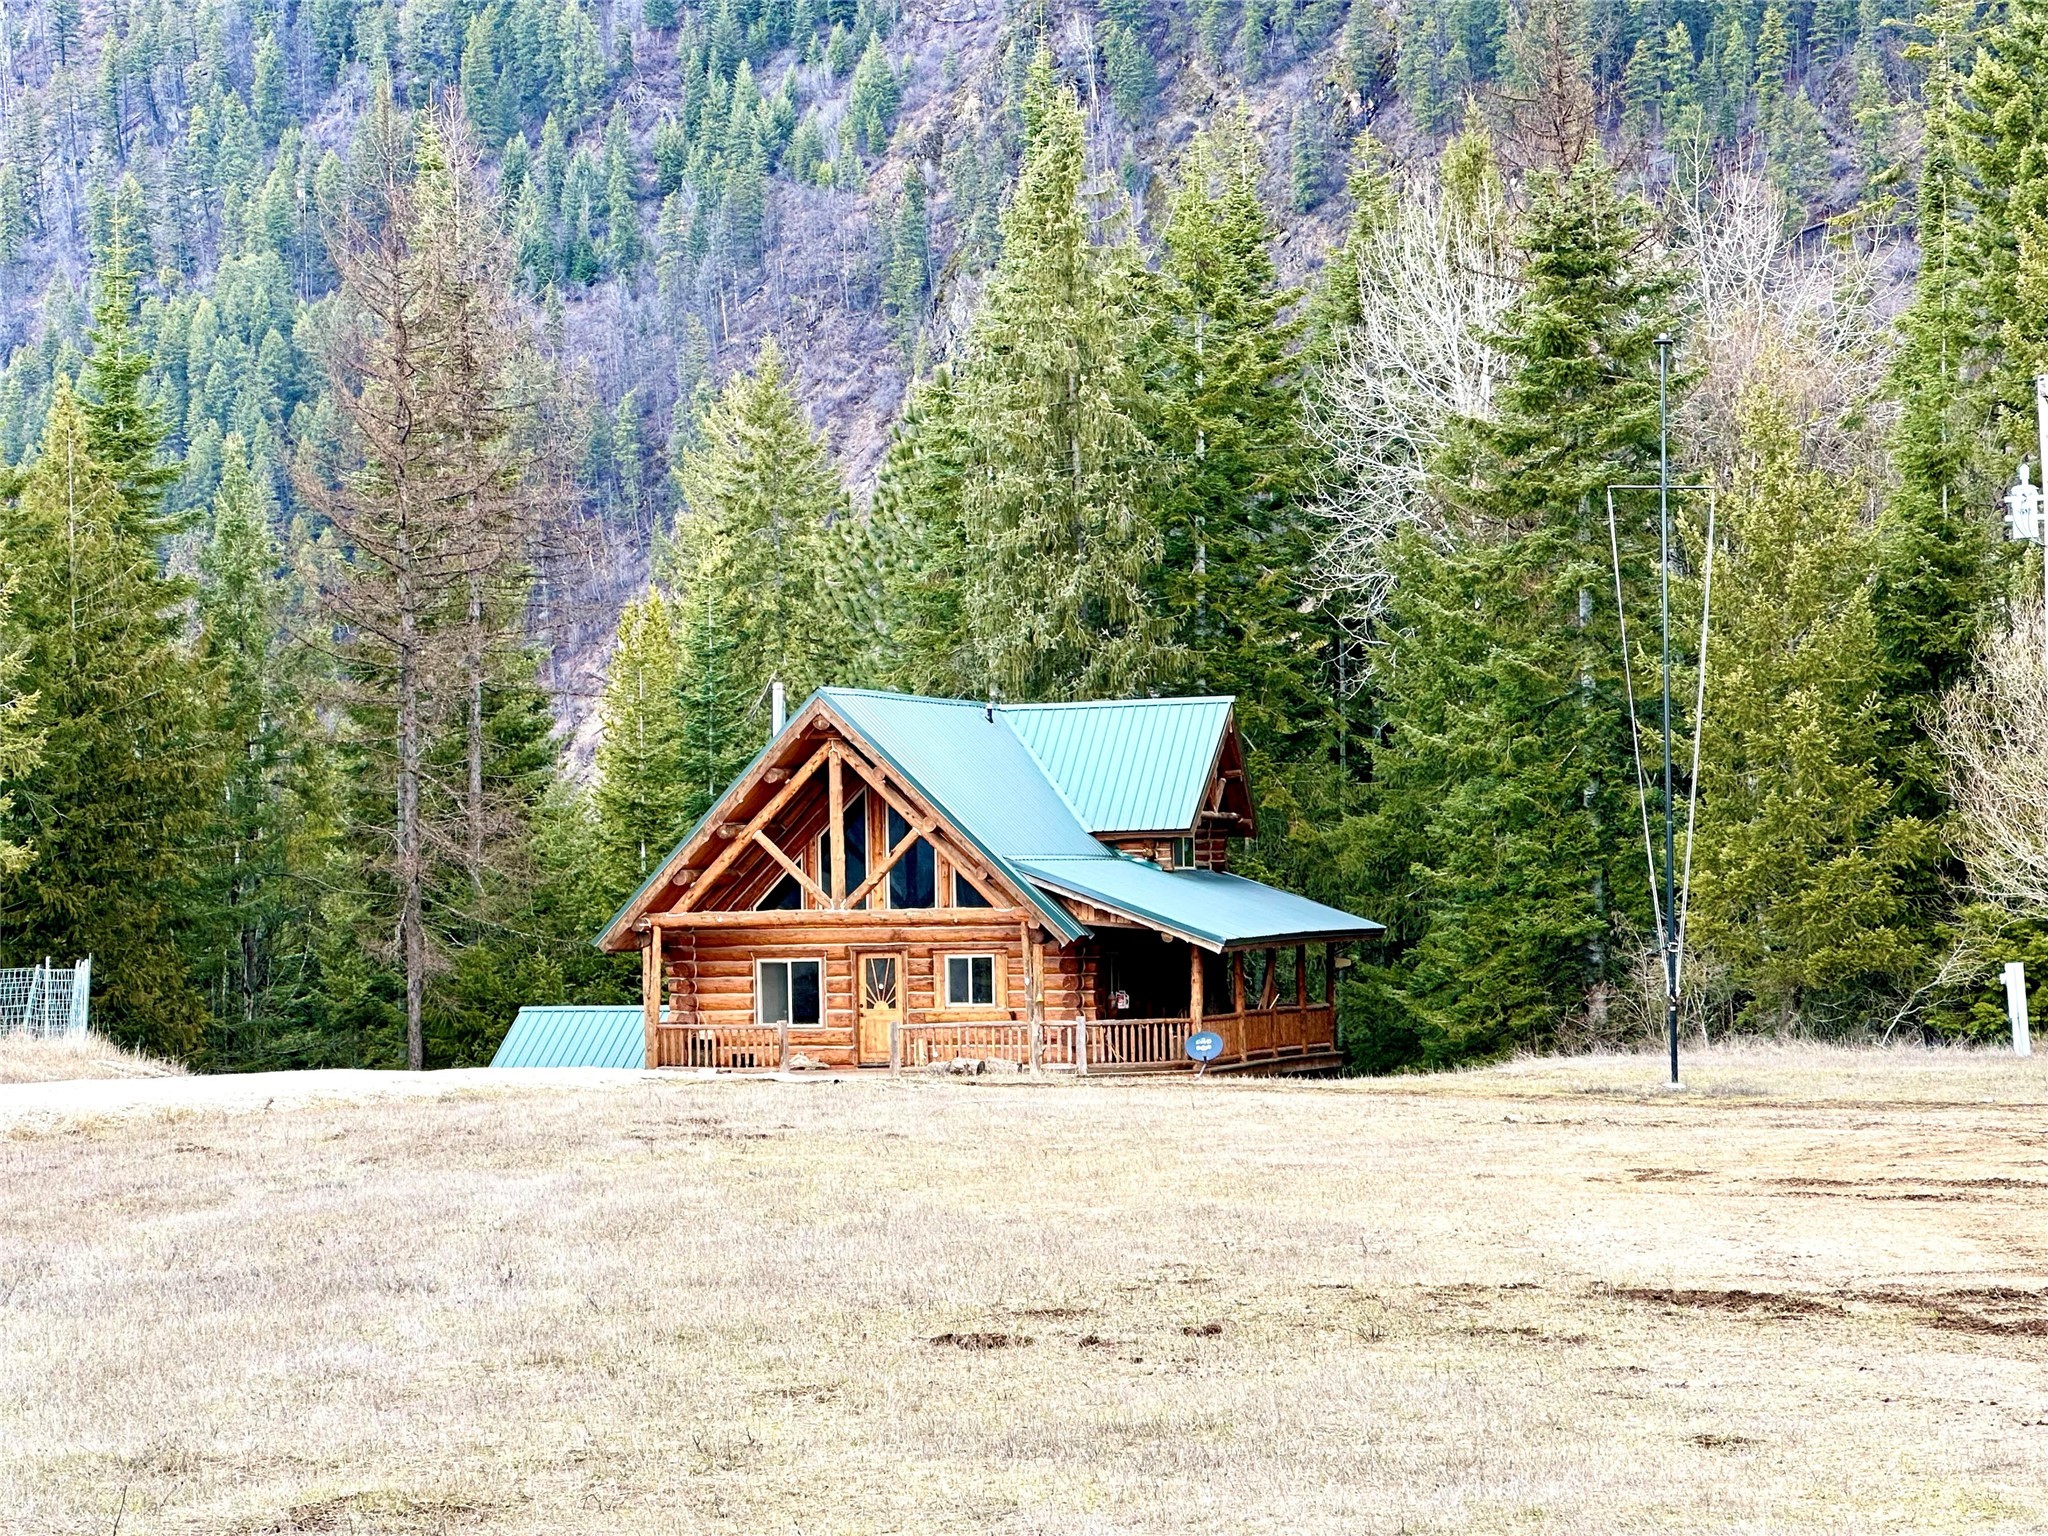 This rural property in the small community of Heron, MT. is situated just a few miles from the MT-ID state line. The property is partially fenced for animals, a fenced garden area, a pole barn for hay, and a storage shed. The log cabin was built in 2015 and has 1 bed/bath on the main level and 1 bed/bath in the upper loft, a full basement that 
 could become more sleeping space, a den, an office, storage,  or whatever you want it to be. The basement can be accessed from inside the house or from outside the house.

MORE PICTURES COMING SOON!!!